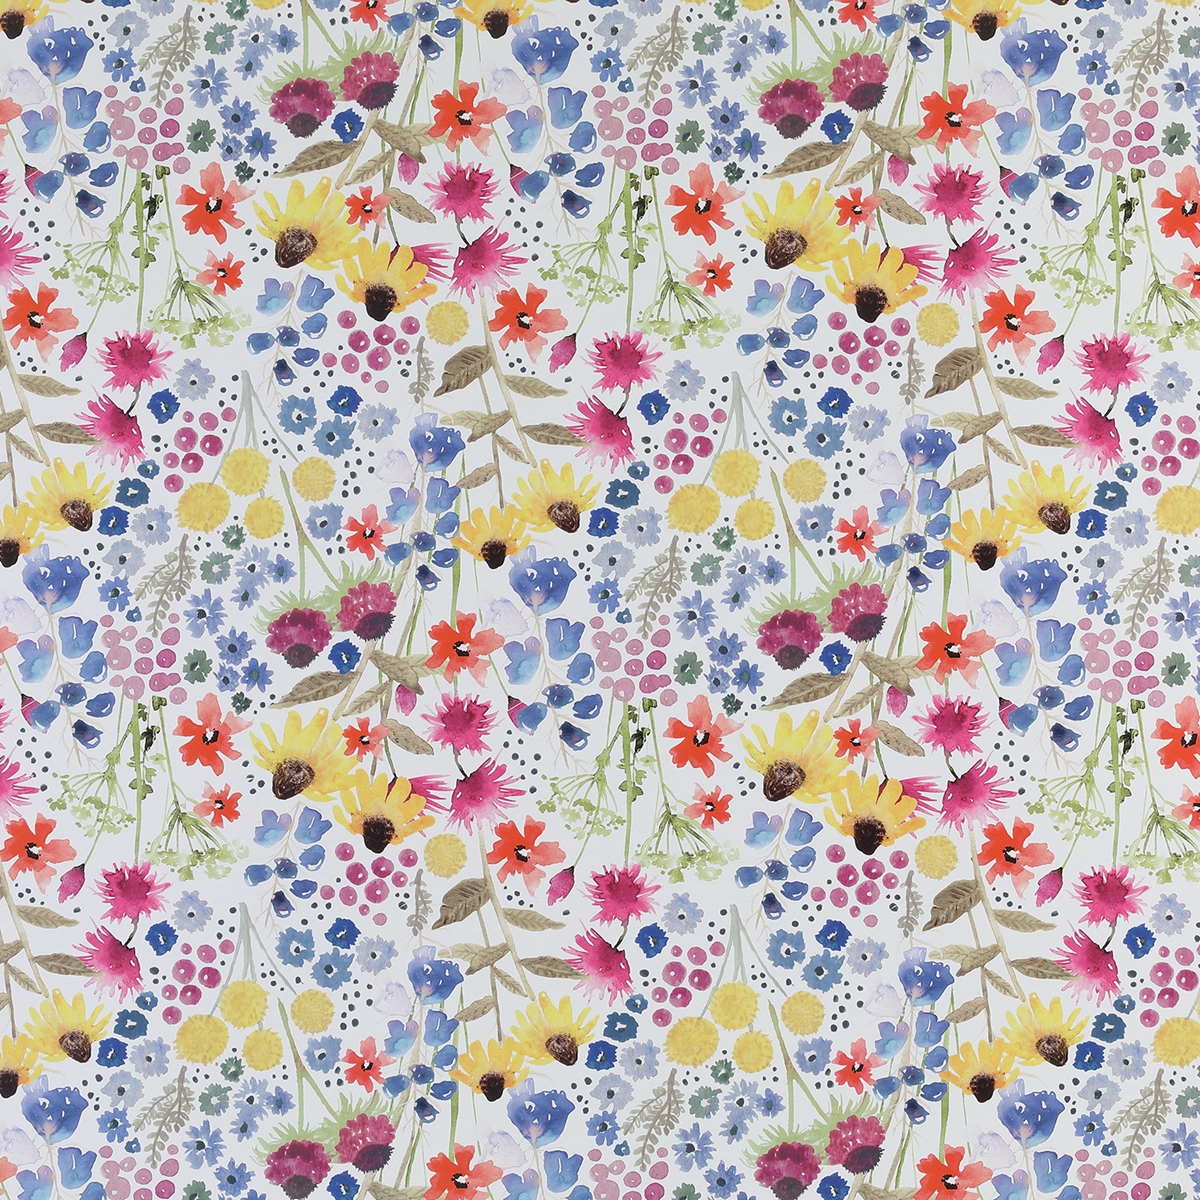 Wildflowers Wrapping Paper